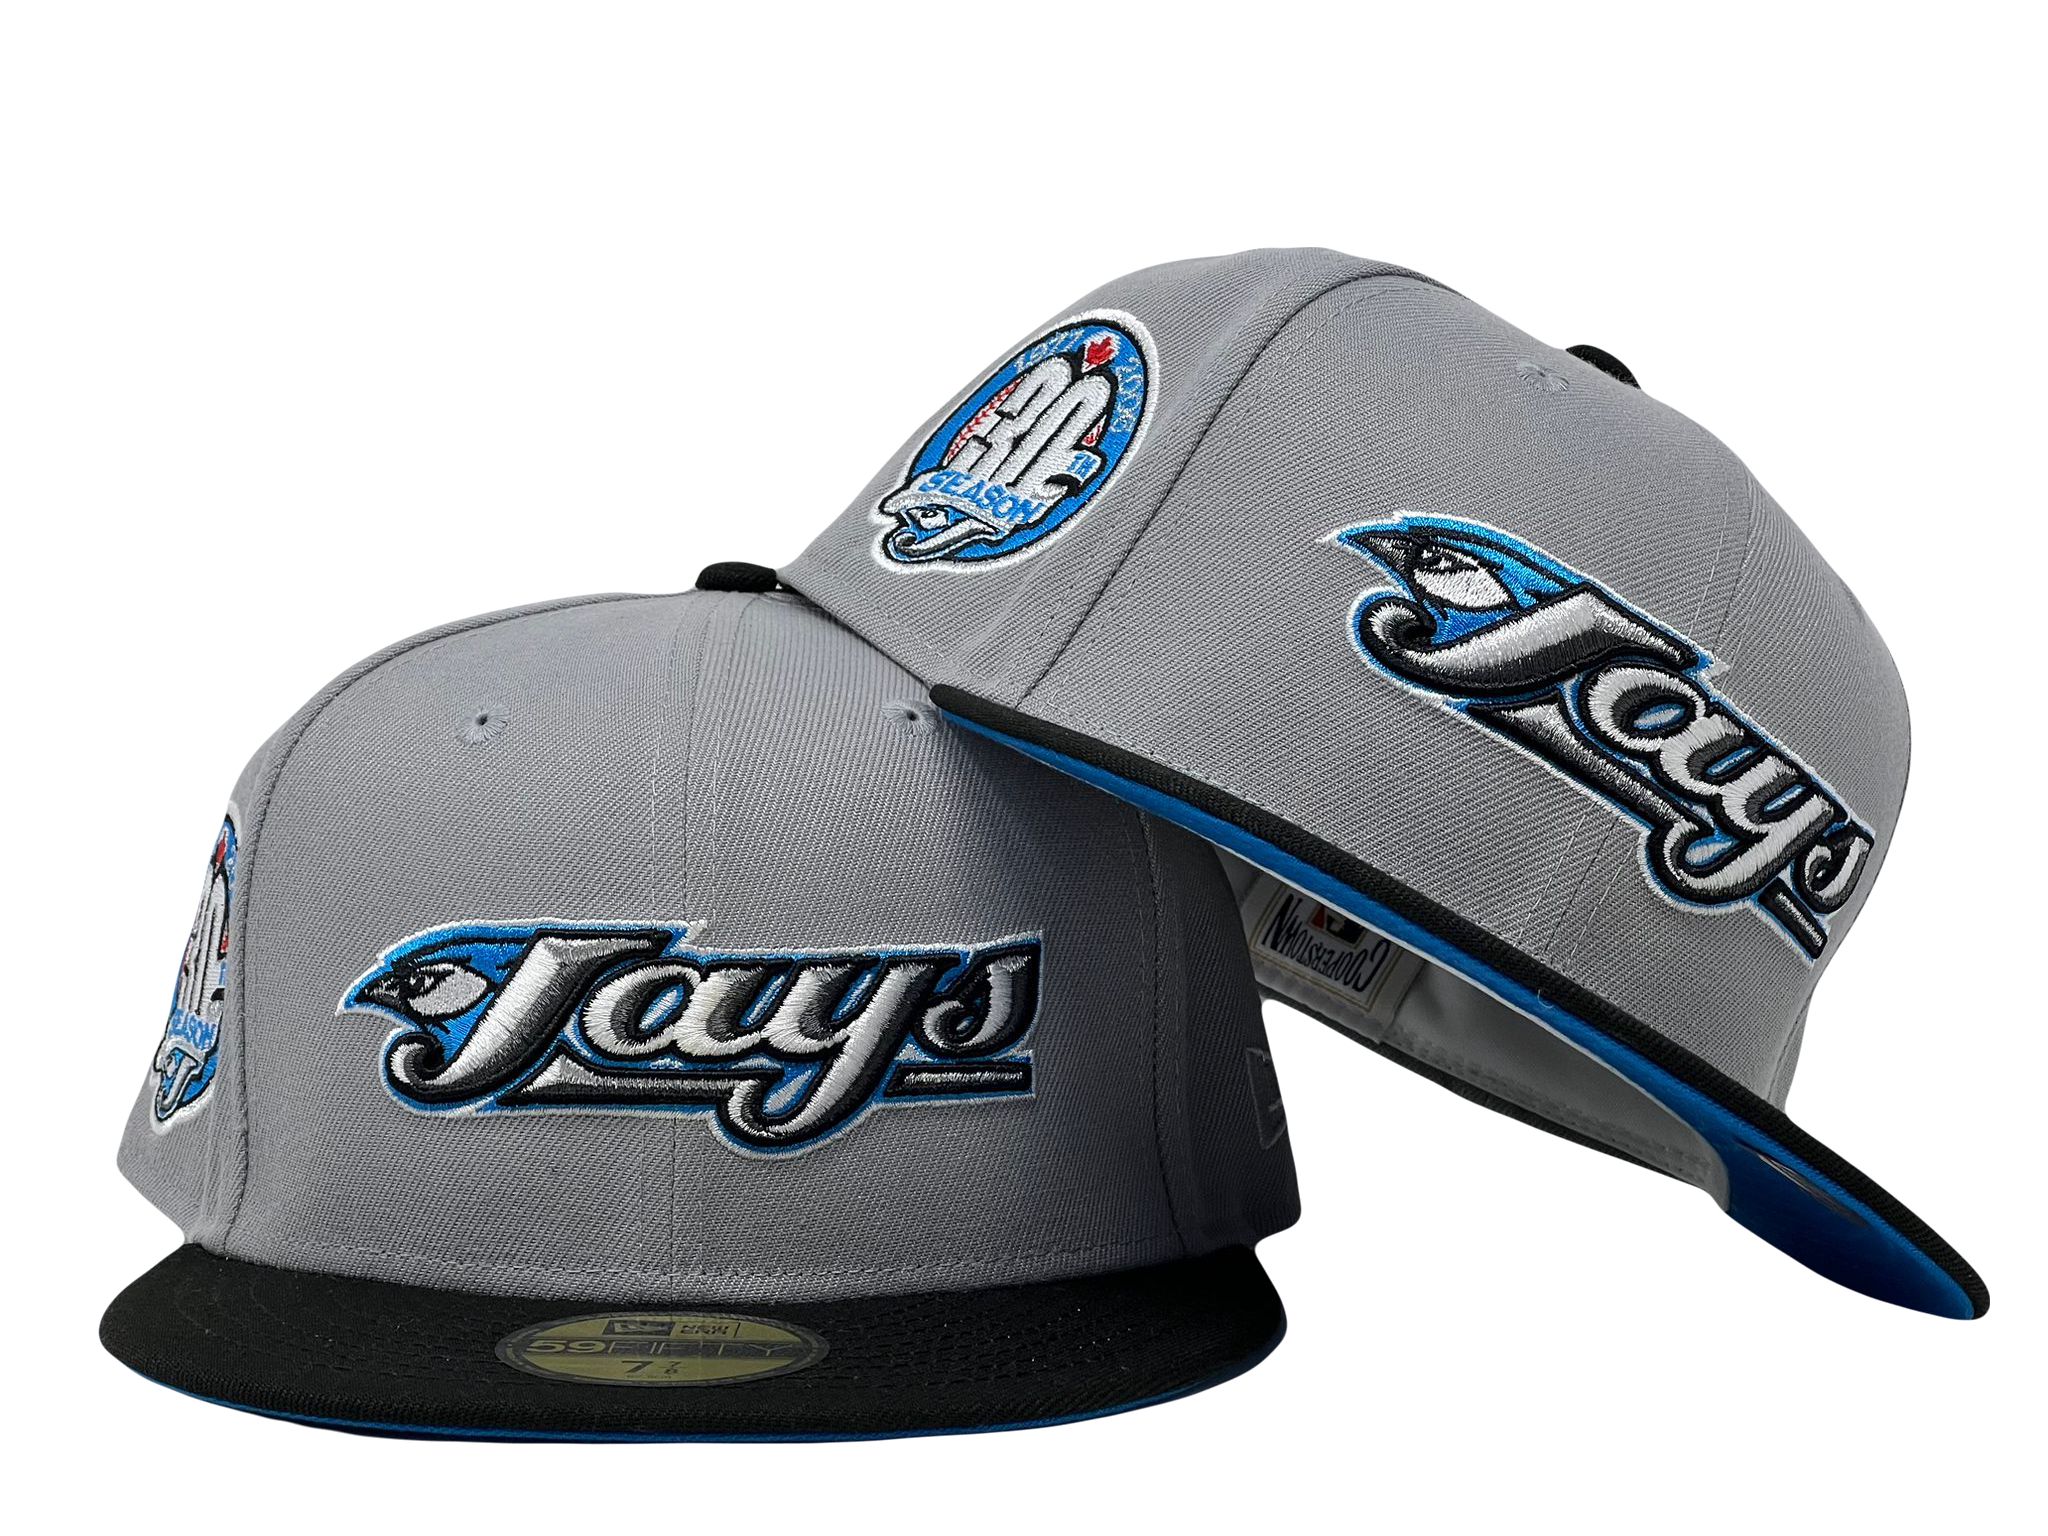 Toronto Blue Jays Fitted Hat, Blue Jays Fitted Caps